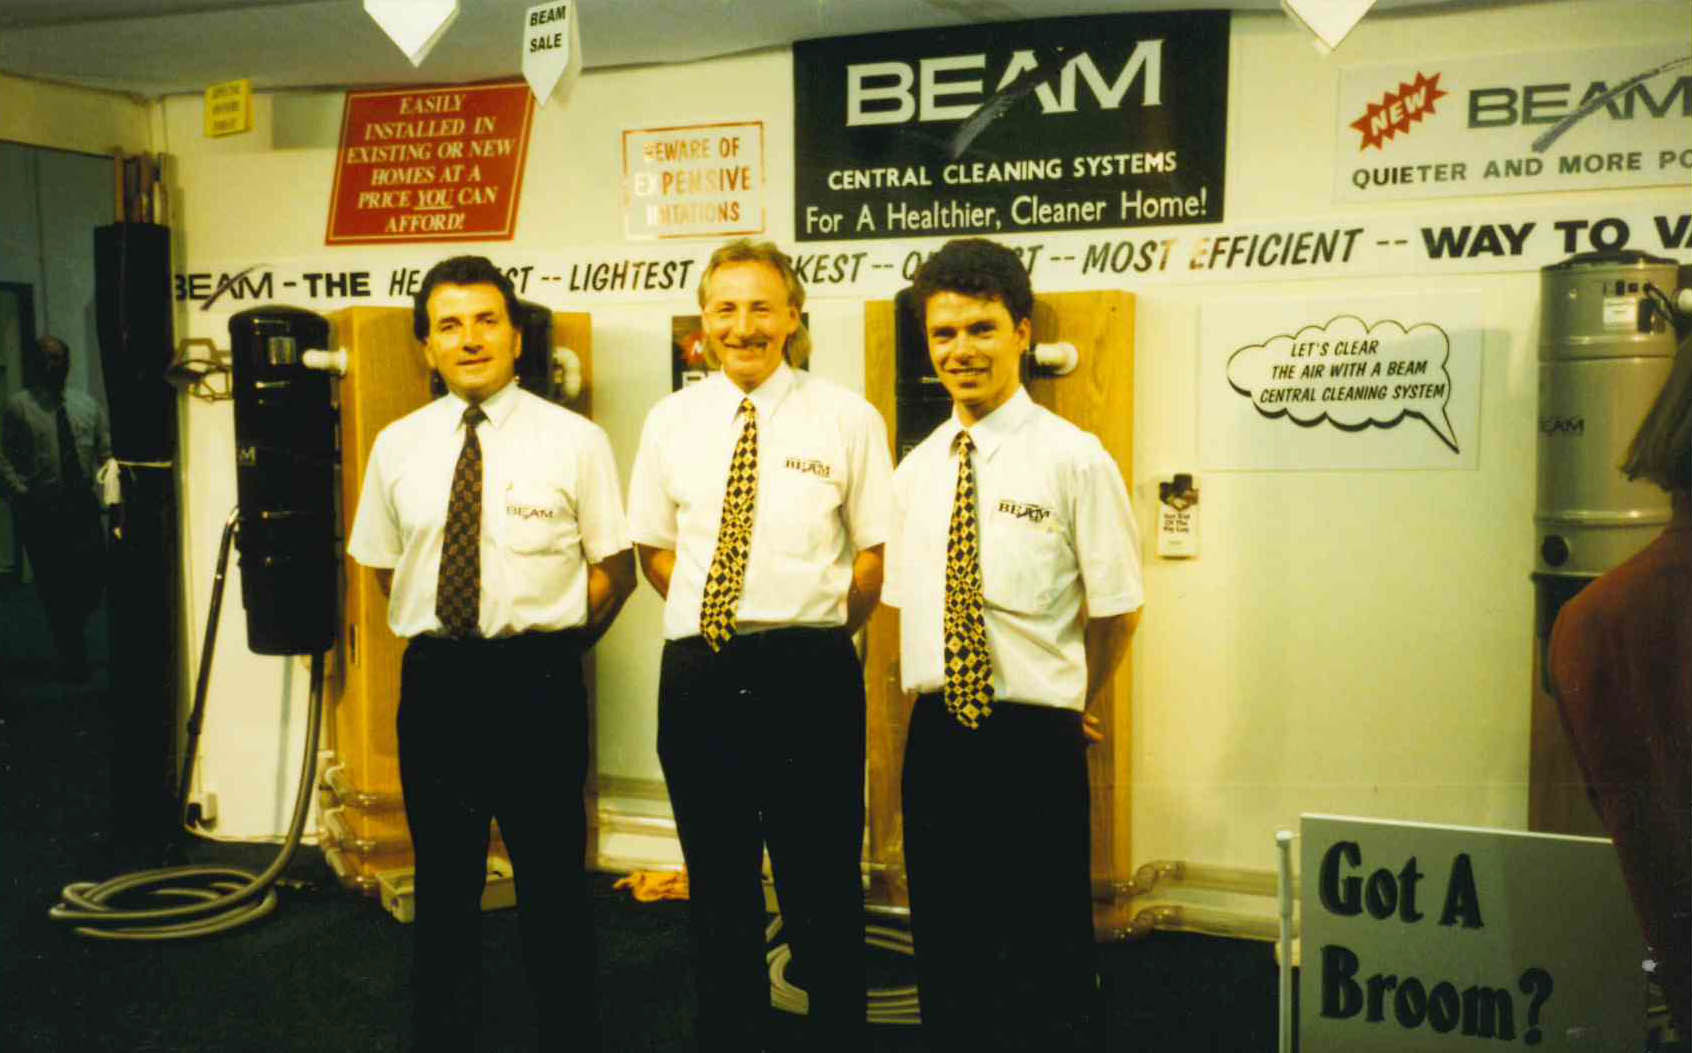 The Beam Team at Ideal Home Show 1993